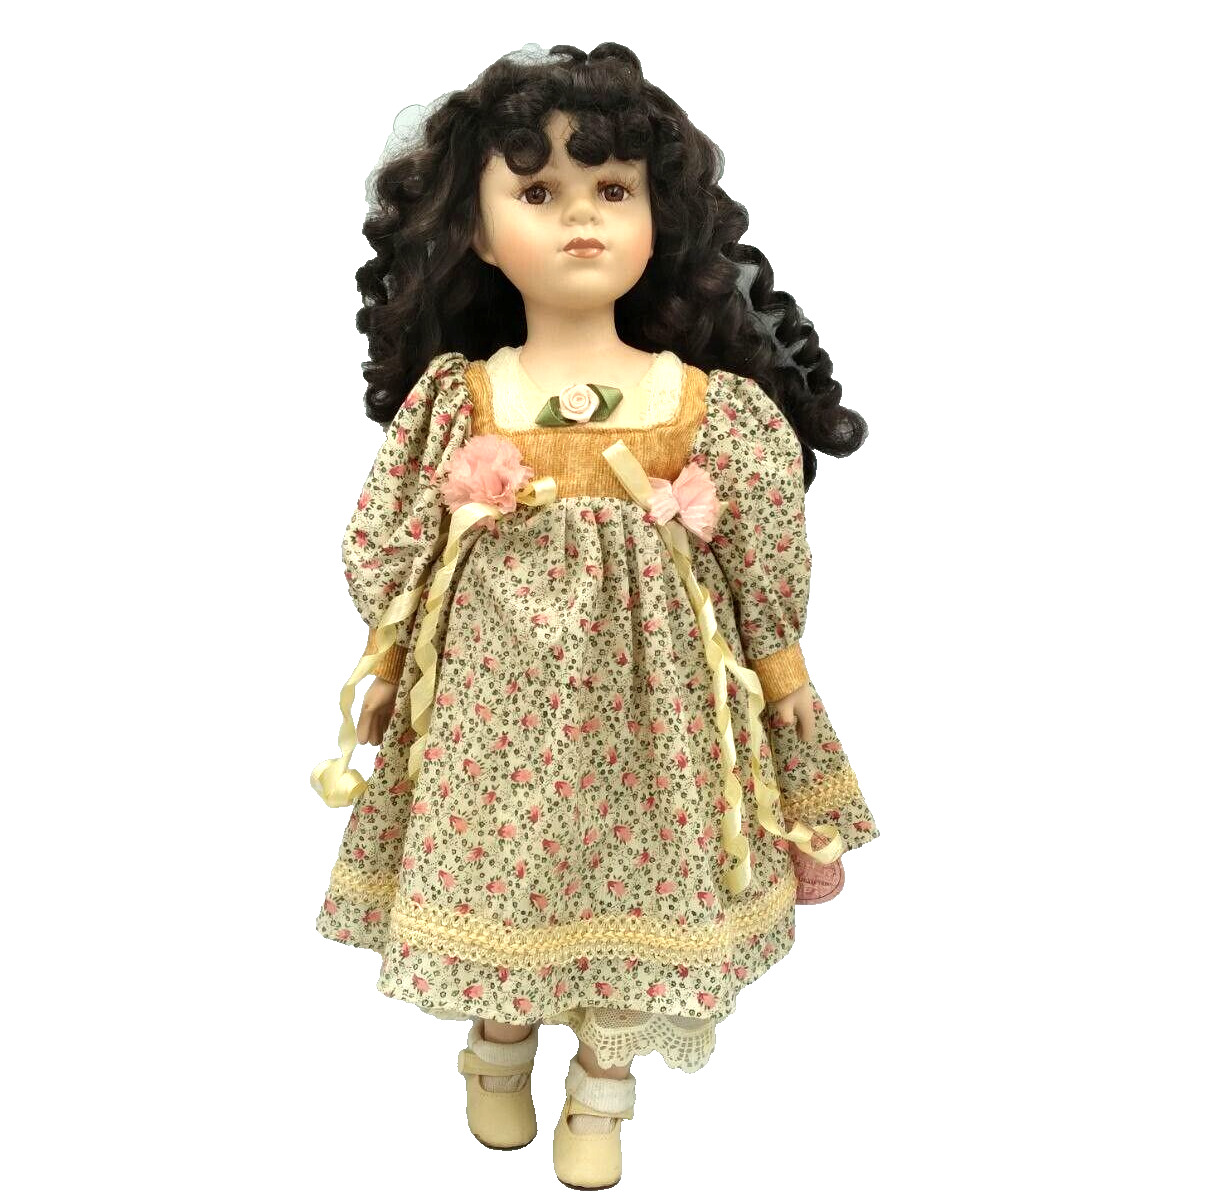 VTG Porcelain Doll J. Misa Collection Beautiful Brown Haired Country Girl Doll